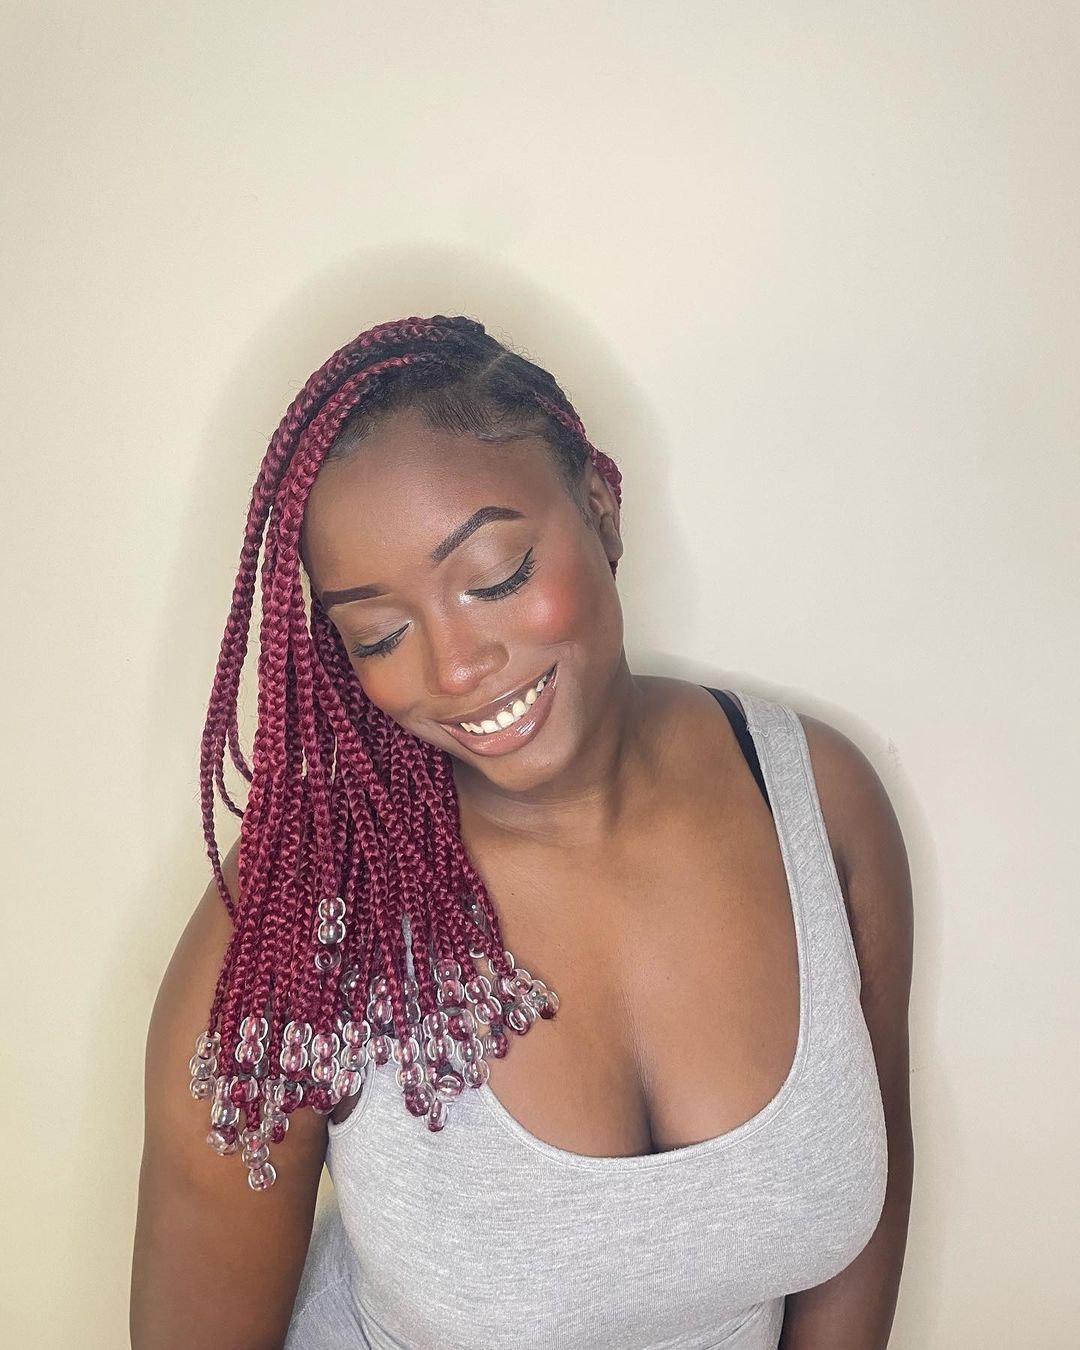 21. Short Burgundy Knotless Braids With Water Beads